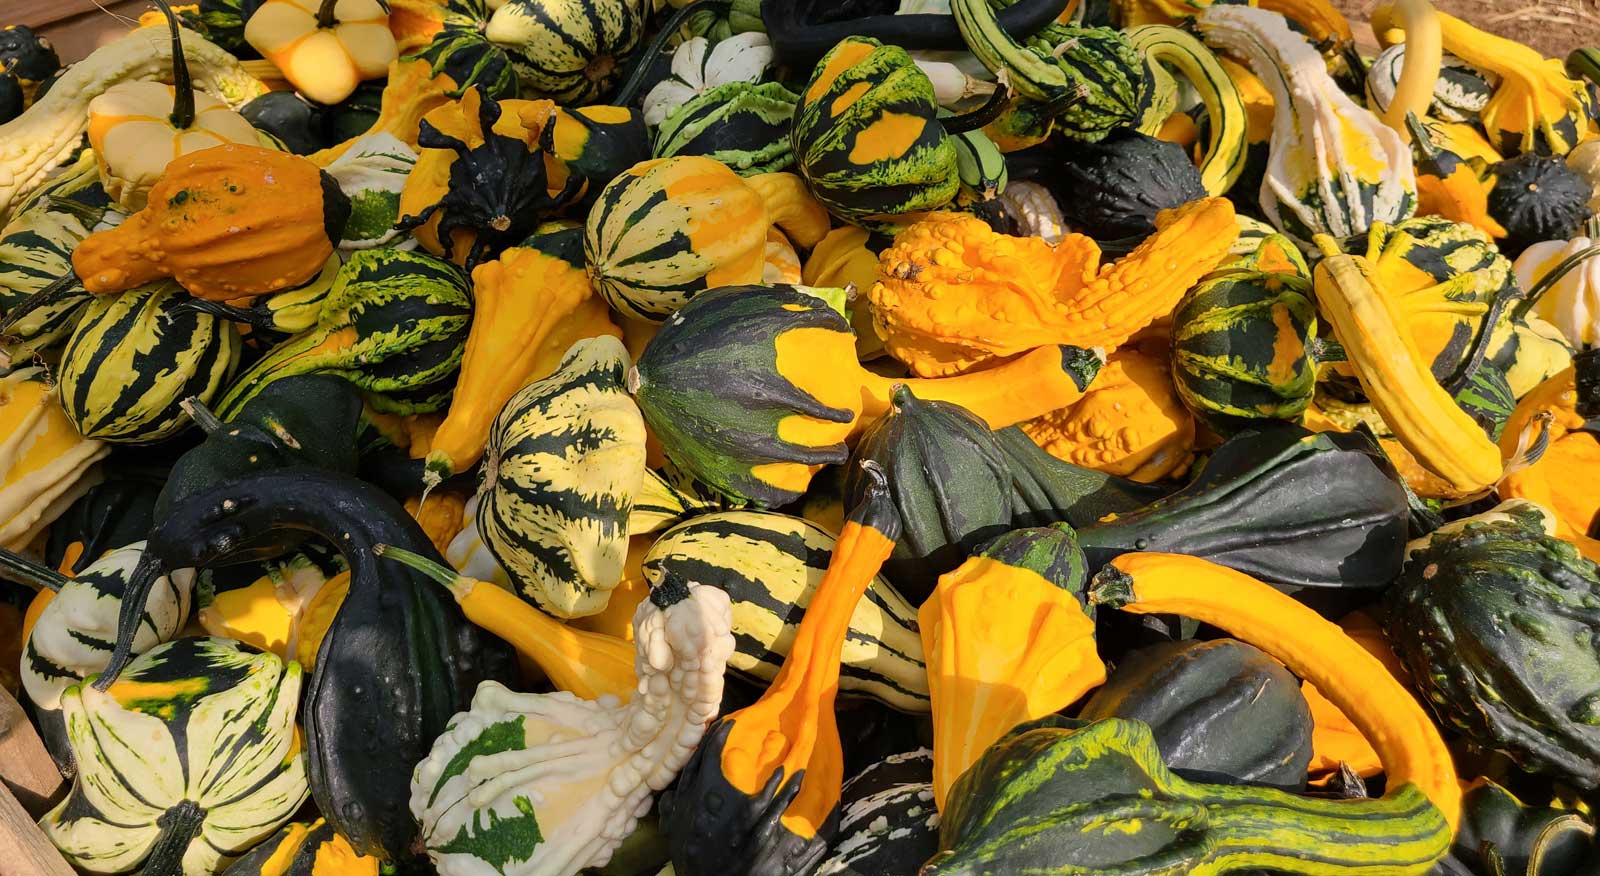 Gourds for Autumn Decor at Goffle Brook Farms in RIdgewood NJ